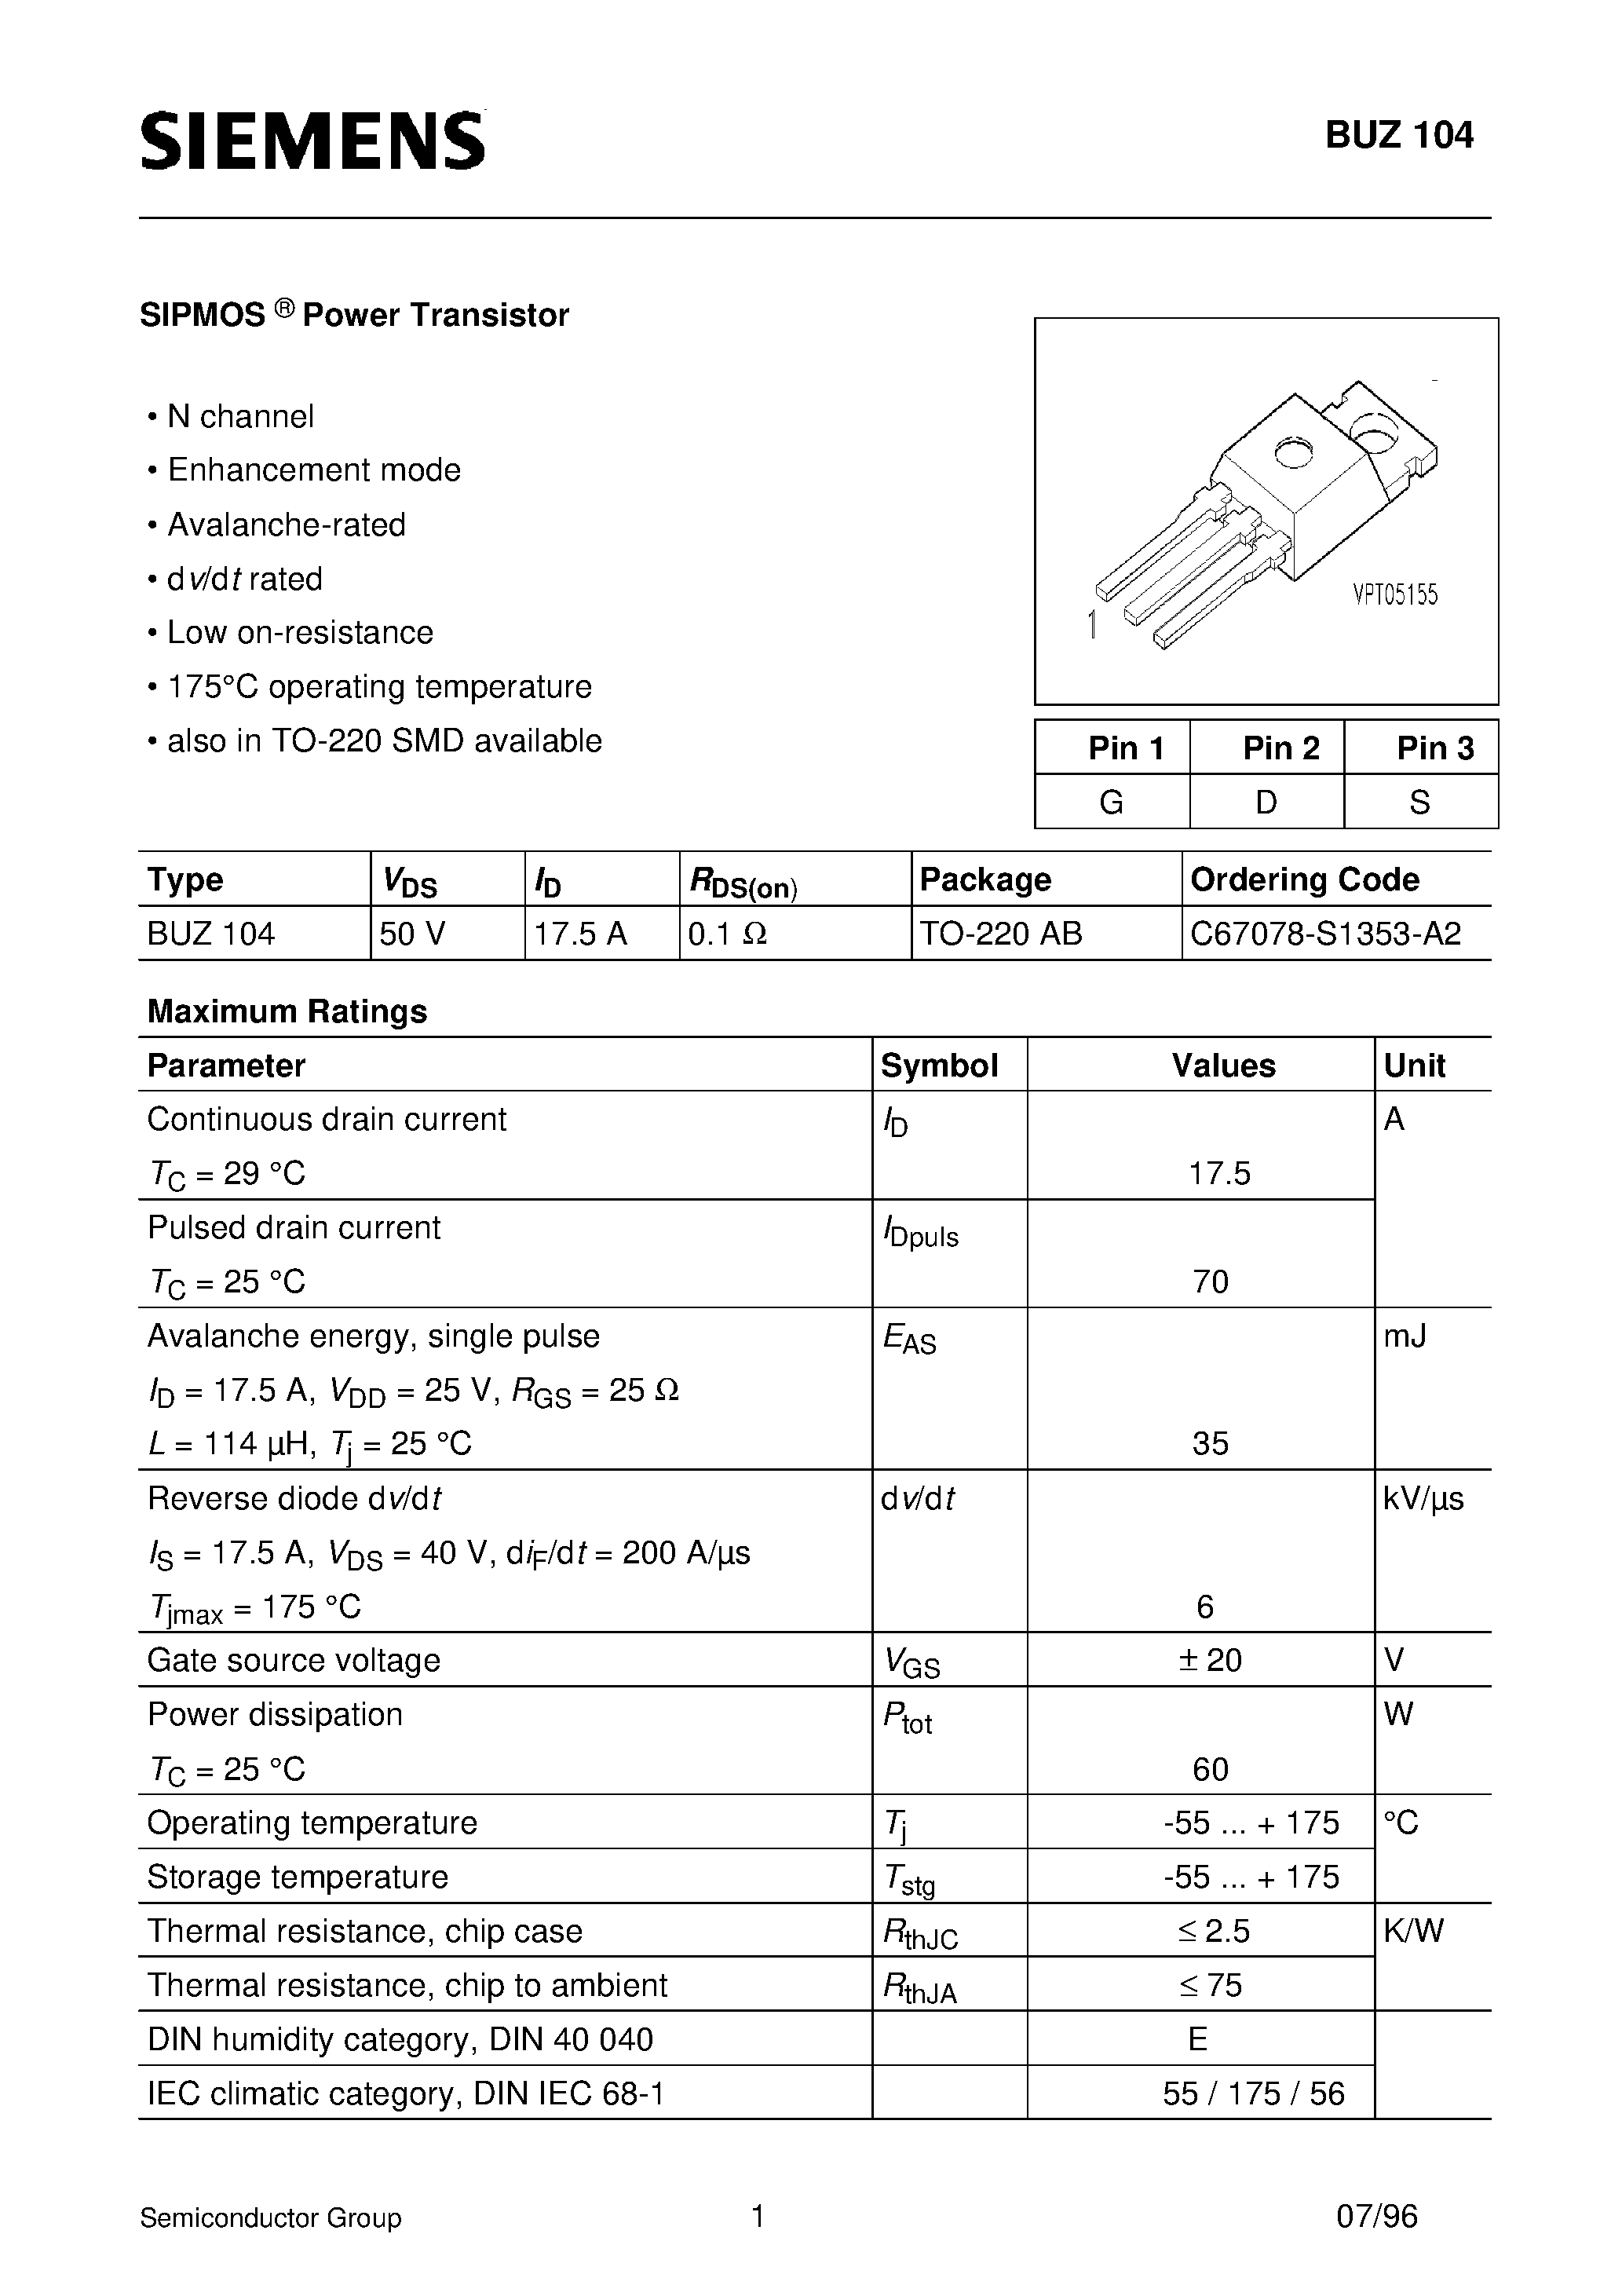 Datasheet BUZ104 - SIPMOS Power Transistor (N channel Enhancement mode Avalanche-rated d v/d t rated Low on-resistance) page 1